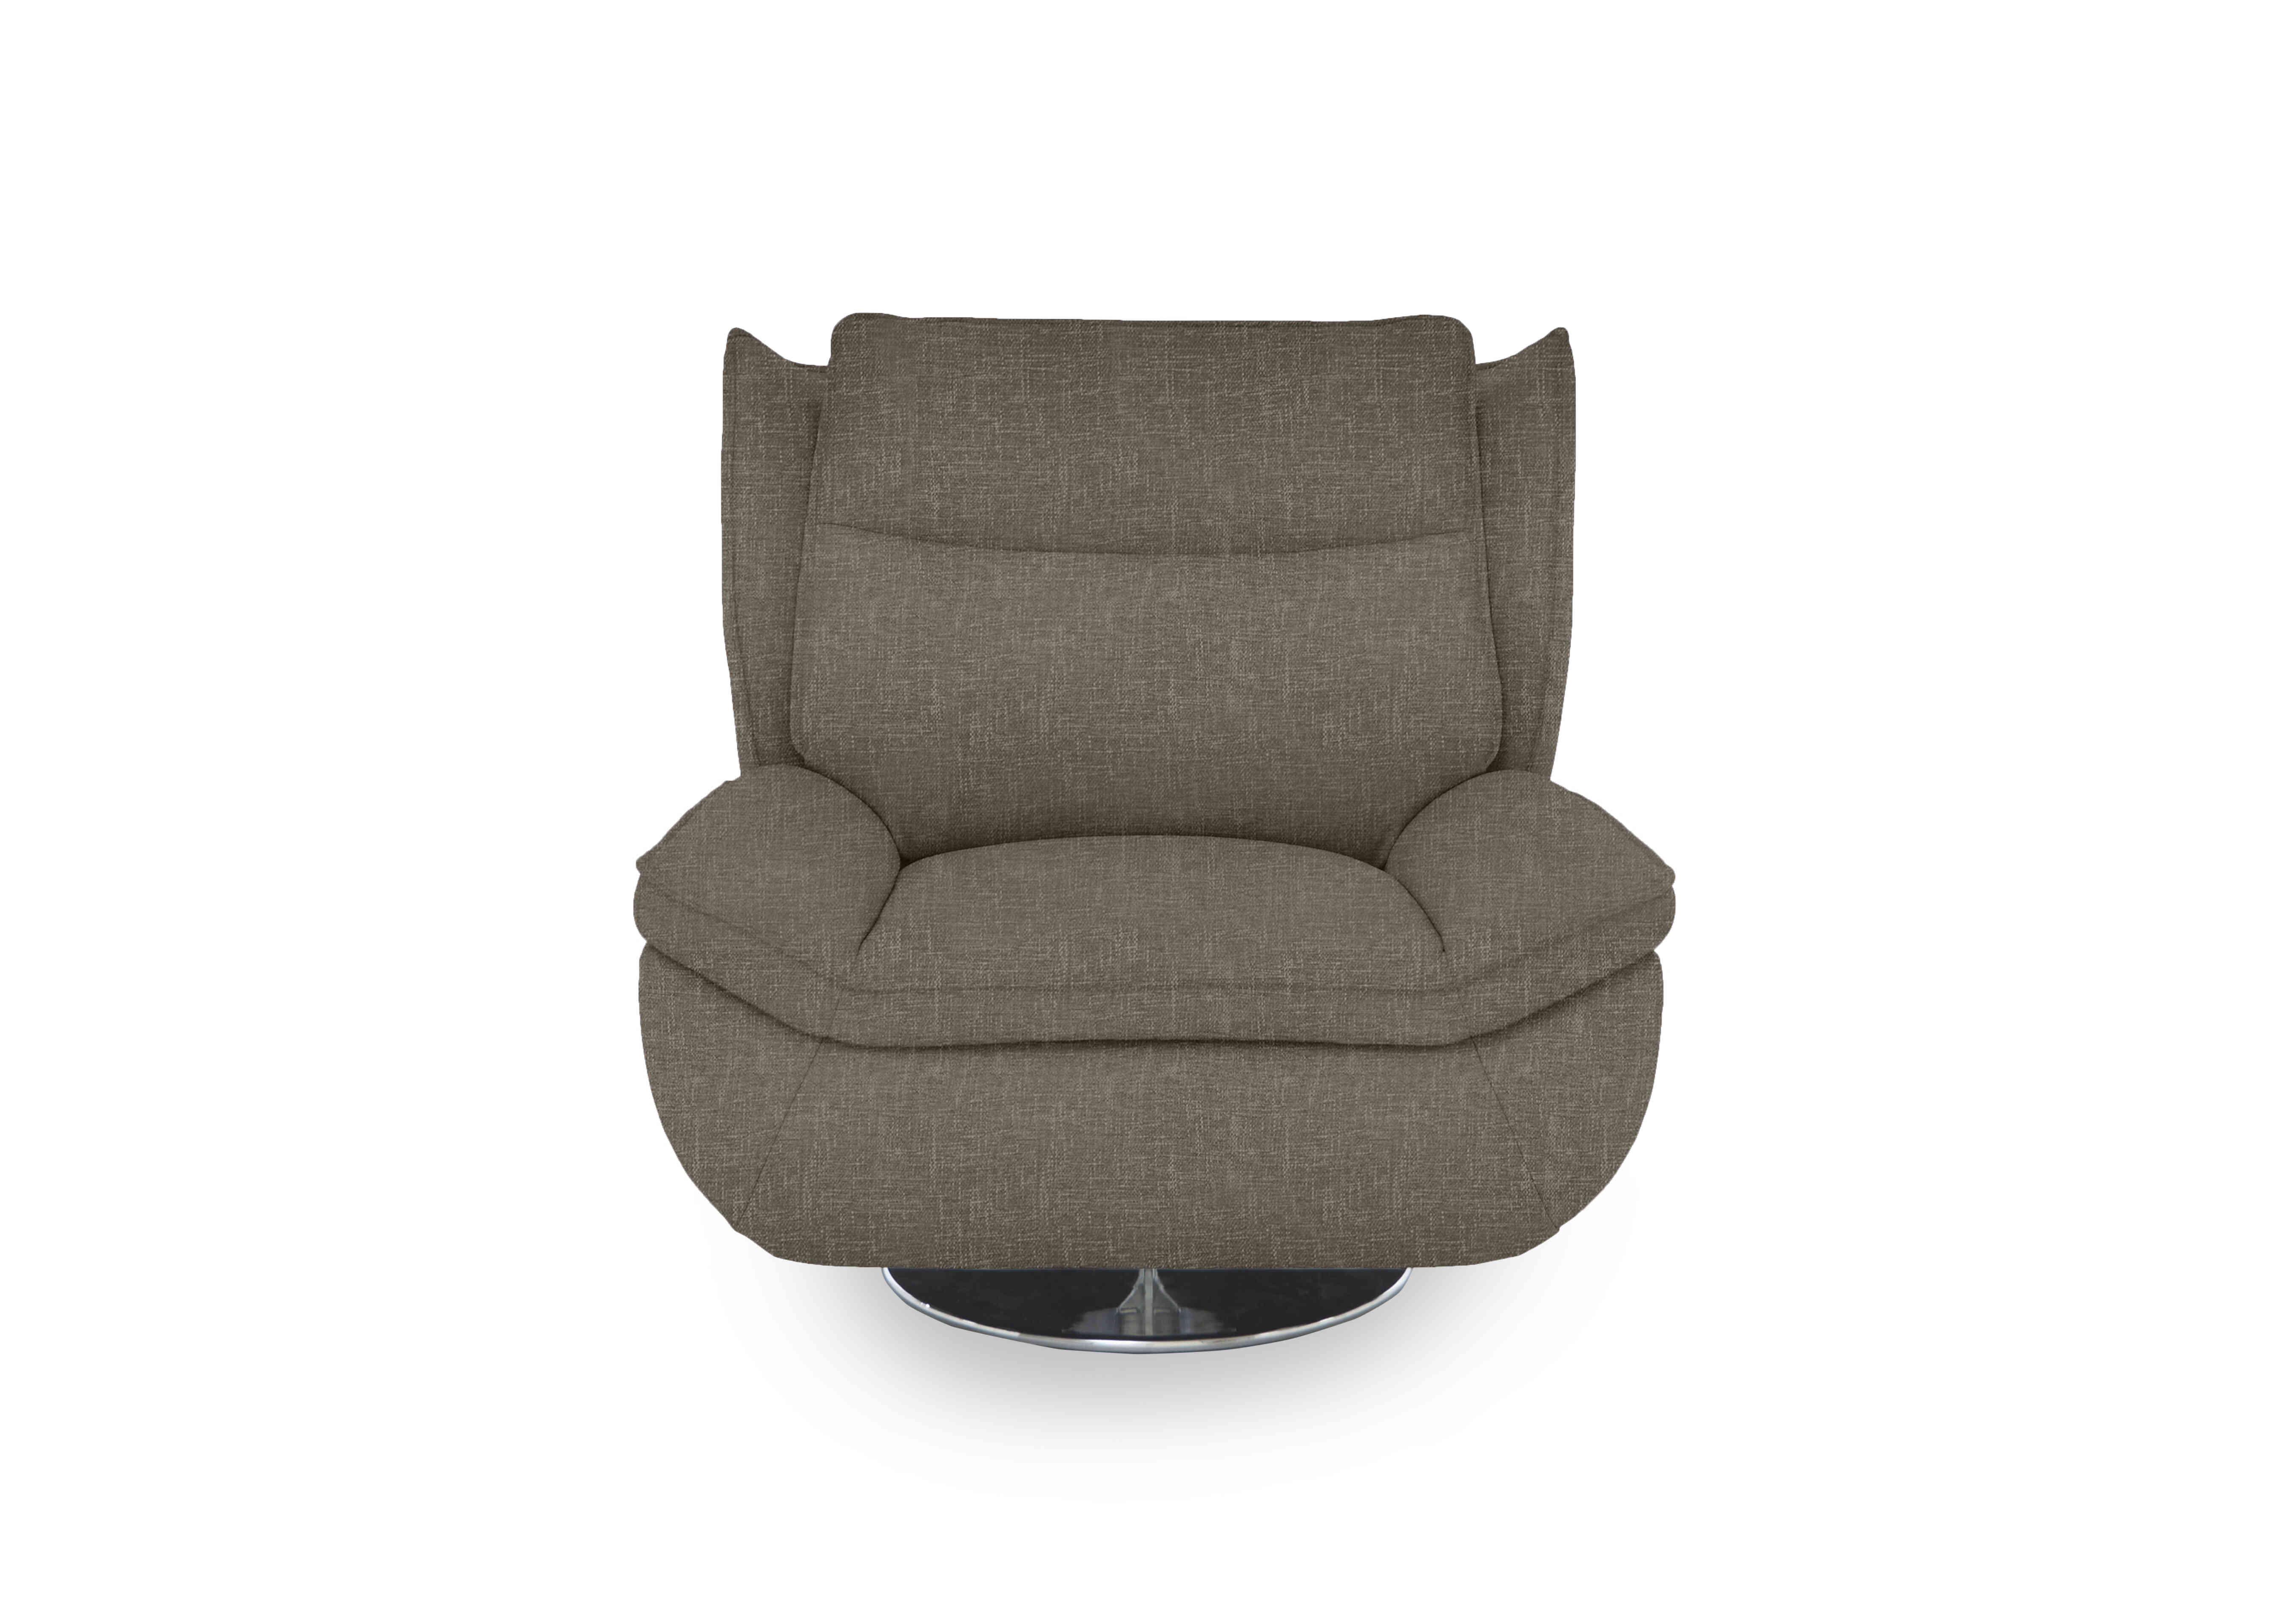 Vinny Fabric Swivel Chair in 15445 Anivia Brown on Furniture Village